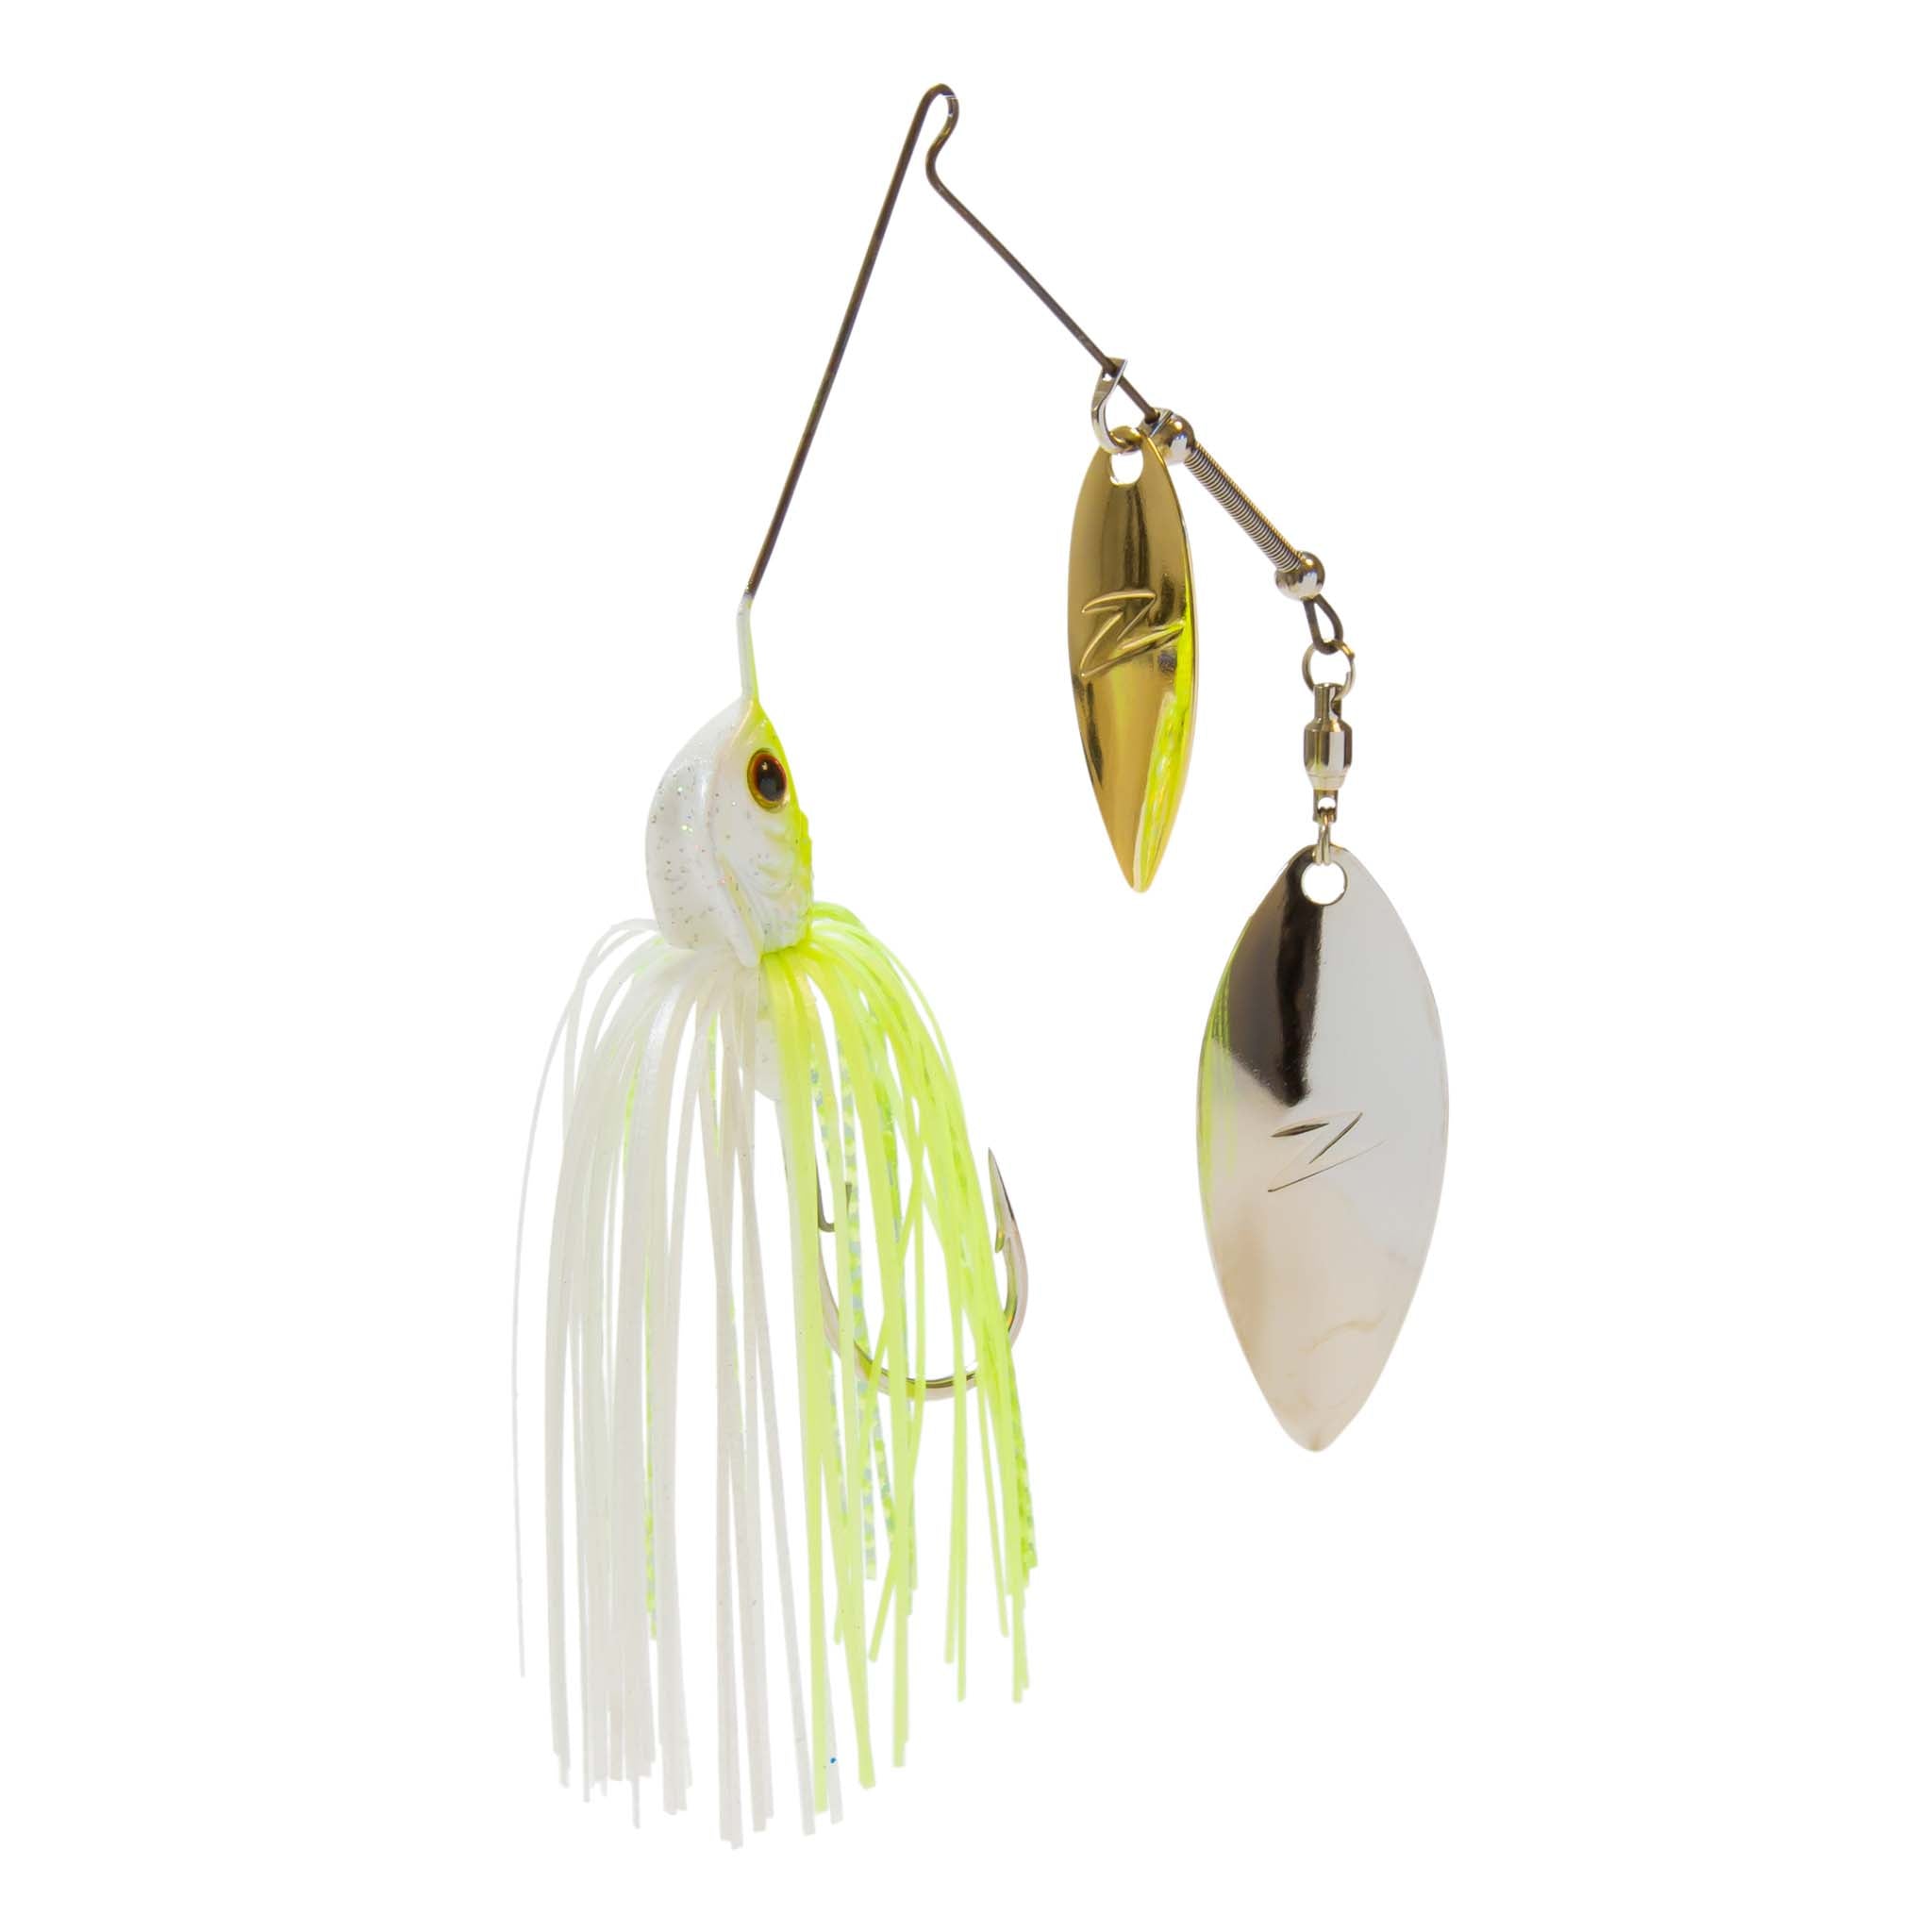 Z-Man Slingbladez Double Willow Spinnerbait - 3/8oz - Chartreuse Pearl